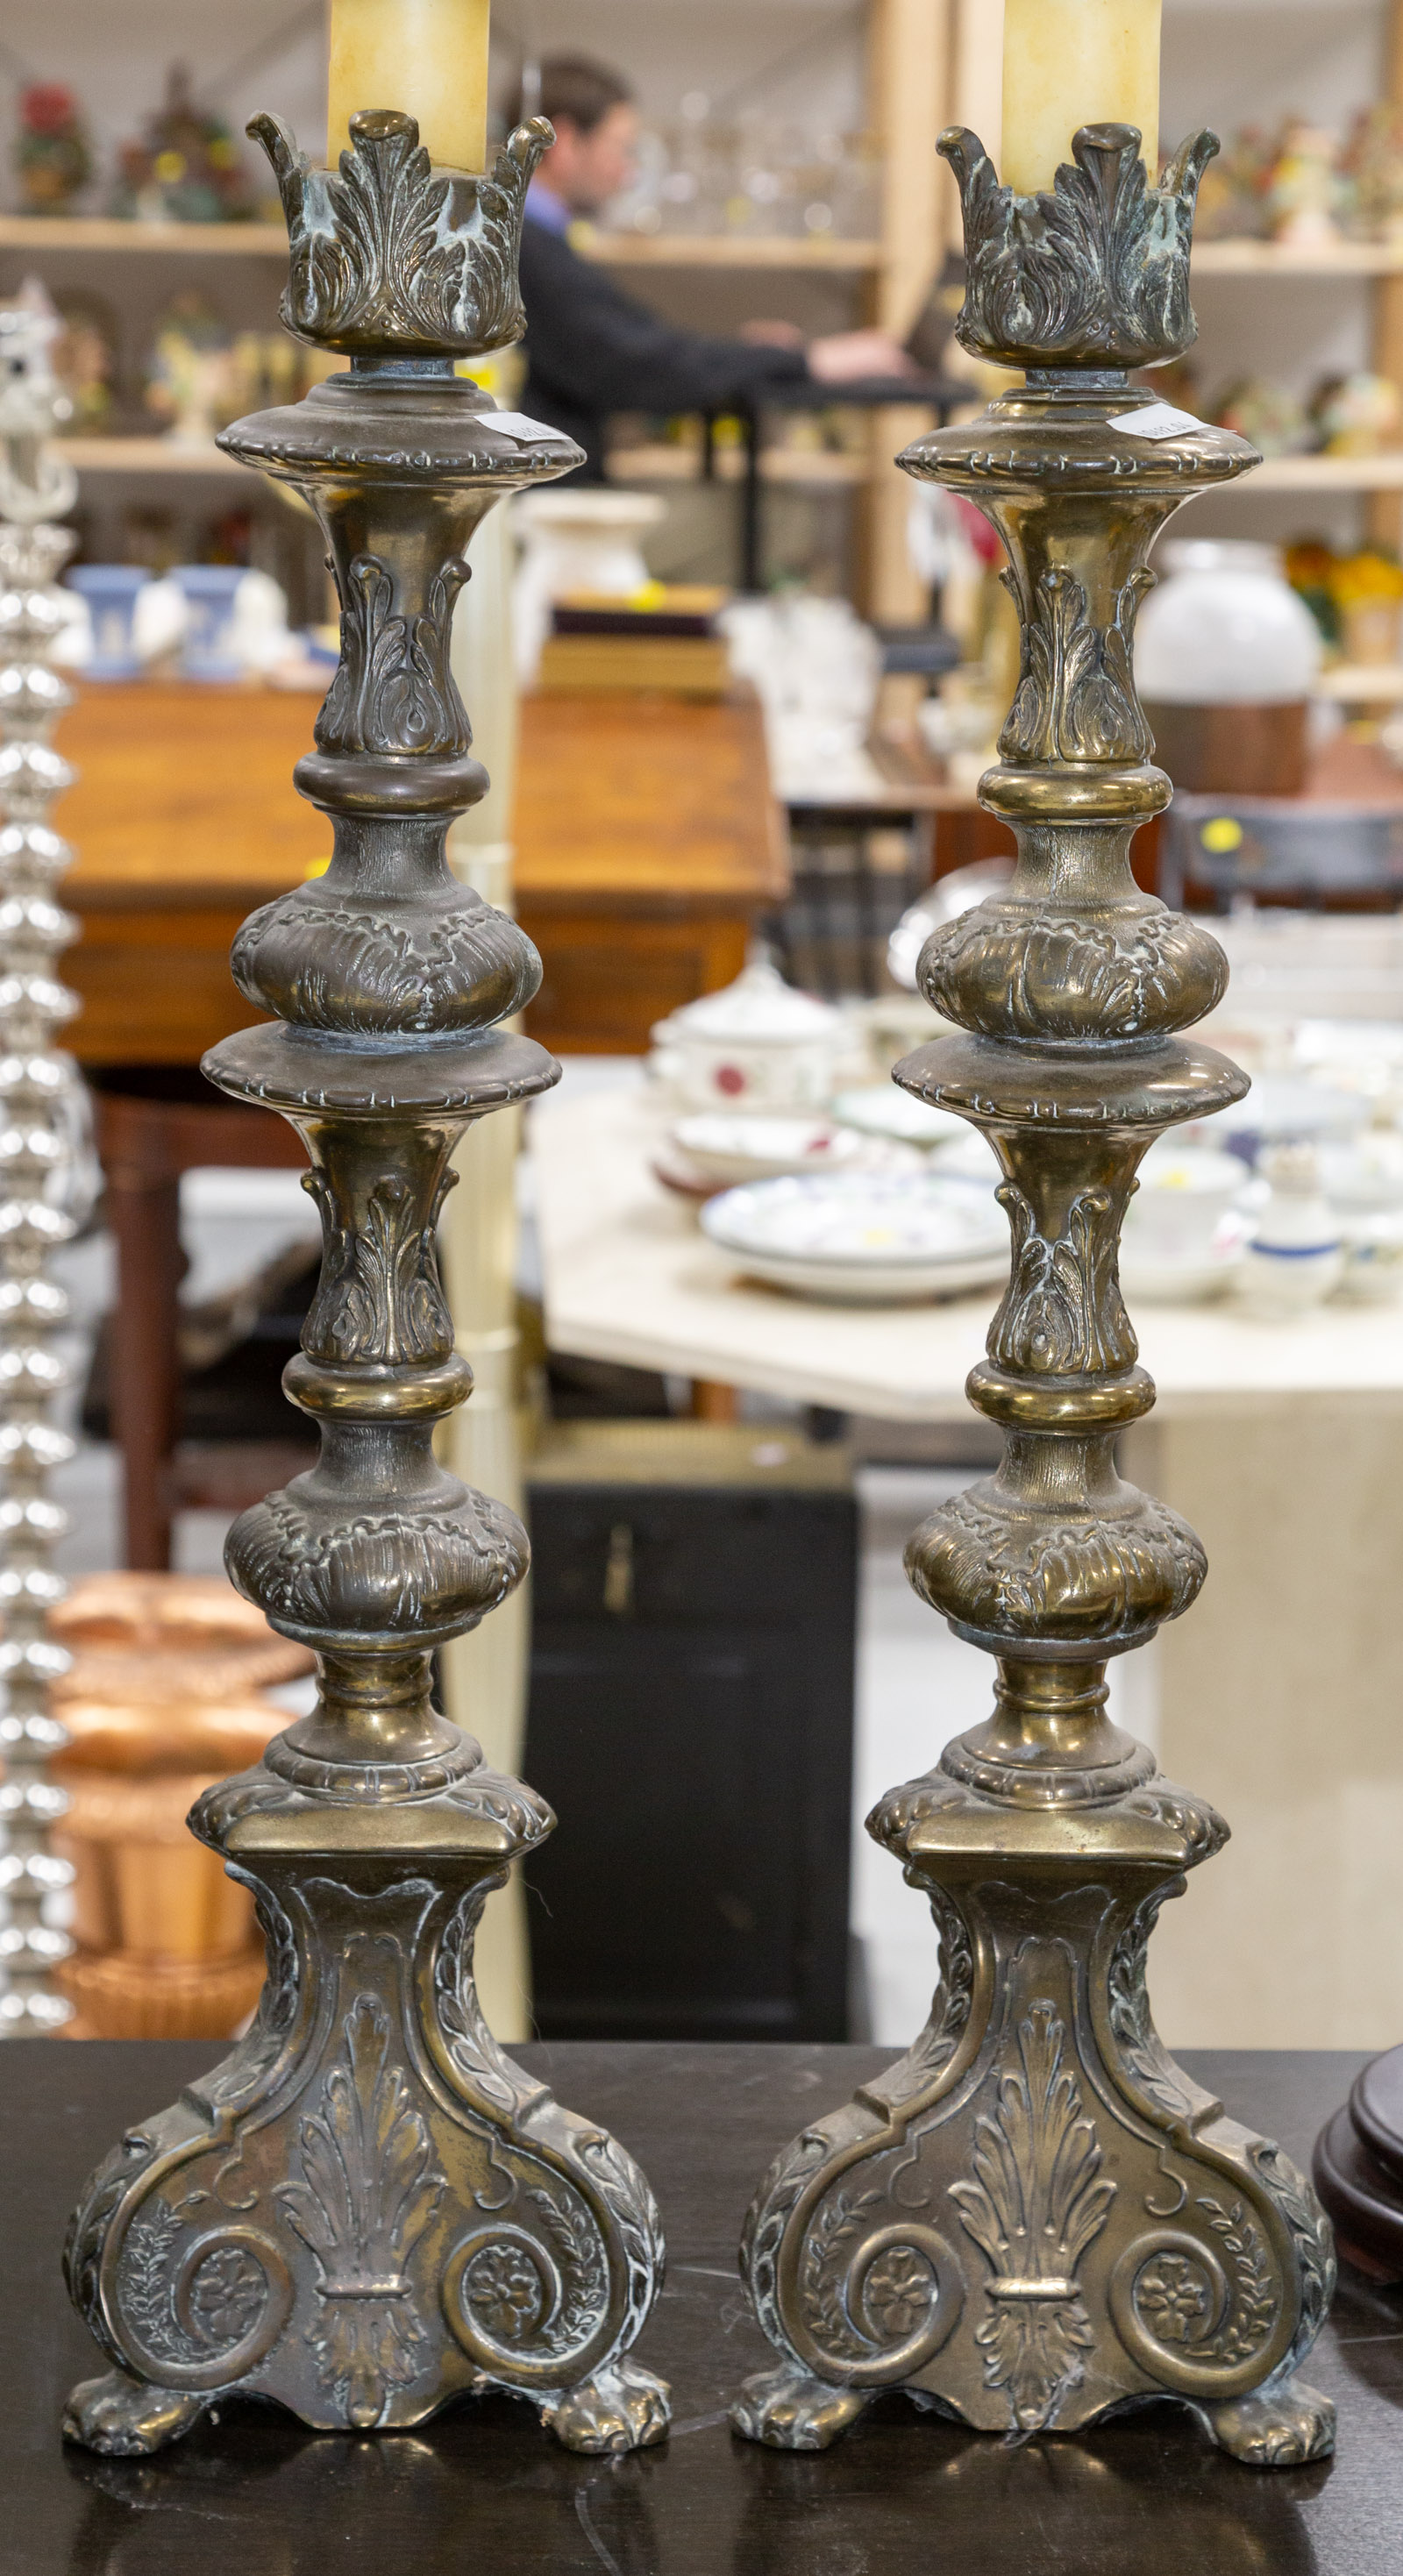 A PAIR OF BAROQUE STYLE CANDLESTICKS 3383a7